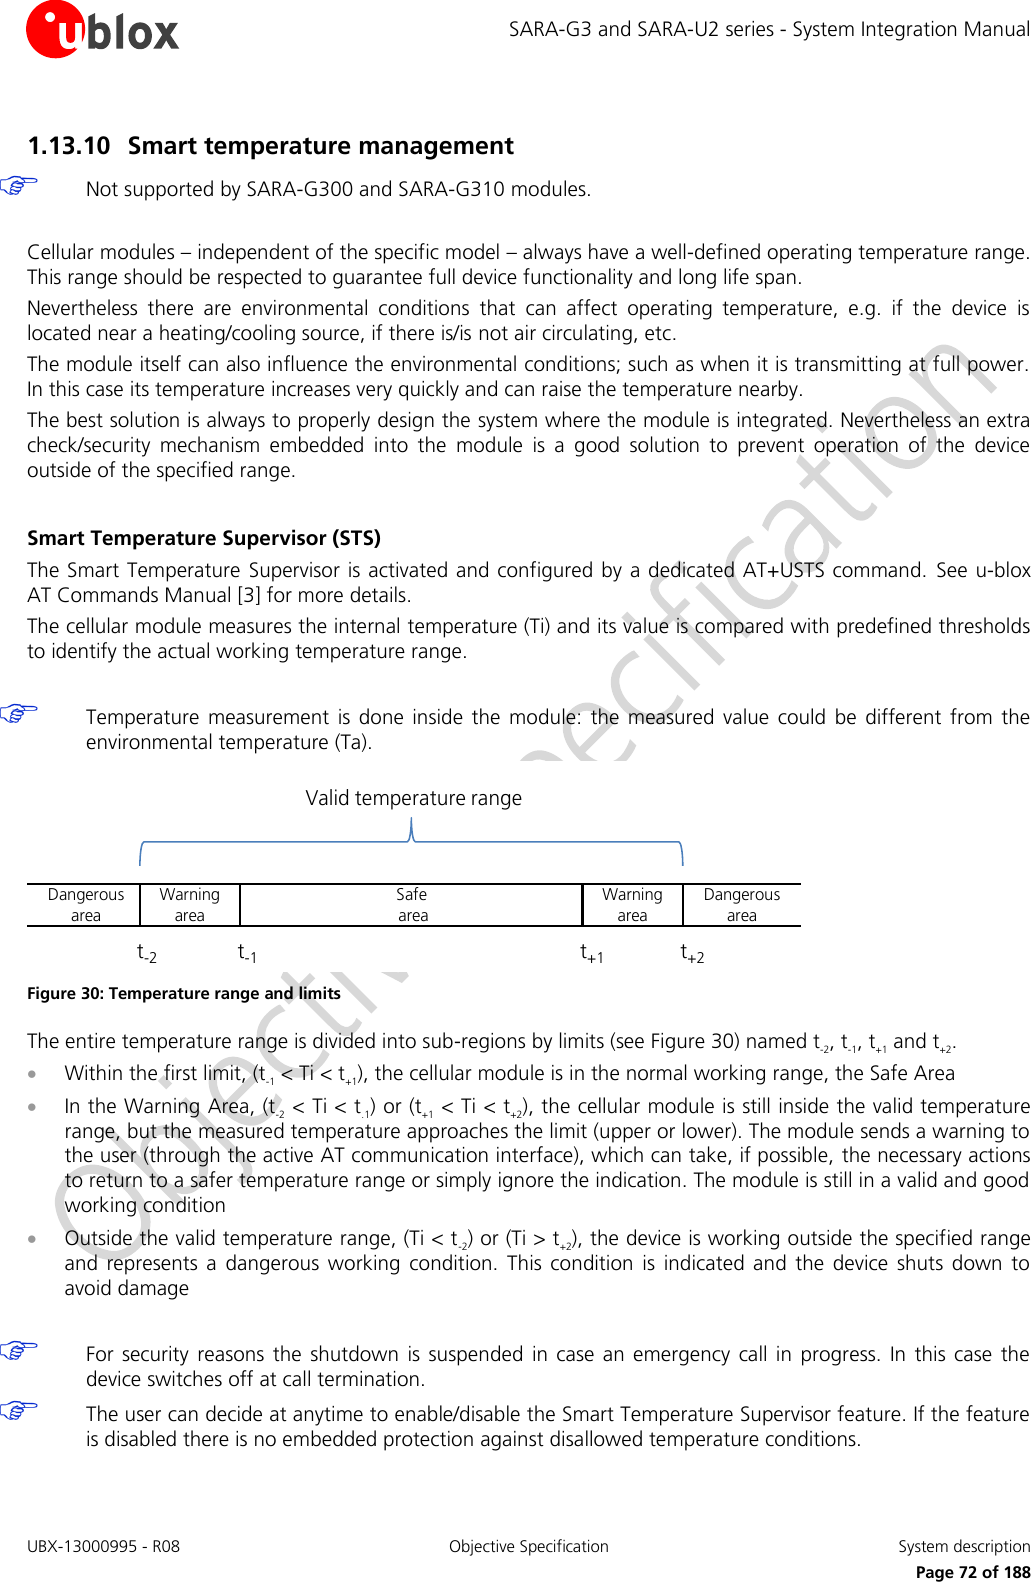 SARA-G3 and SARA-U2 series - System Integration Manual UBX-13000995 - R08  Objective Specification  System description     Page 72 of 188 1.13.10 Smart temperature management   Not supported by SARA-G300 and SARA-G310 modules.  Cellular modules – independent of the specific model – always have a well-defined operating temperature range. This range should be respected to guarantee full device functionality and long life span. Nevertheless  there  are  environmental  conditions  that  can  affect  operating  temperature,  e.g.  if  the  device  is located near a heating/cooling source, if there is/is not air circulating, etc. The module itself can also influence the environmental conditions; such as when it is transmitting at full power. In this case its temperature increases very quickly and can raise the temperature nearby. The best solution is always to properly design the system where the module is integrated. Nevertheless an extra check/security  mechanism  embedded  into  the  module  is  a  good  solution  to  prevent  operation  of  the  device outside of the specified range.  Smart Temperature Supervisor (STS) The Smart Temperature  Supervisor is activated and configured by a dedicated AT+USTS command. See u-blox AT Commands Manual [3] for more details. The cellular module measures the internal temperature (Ti) and its value is compared with predefined thresholds to identify the actual working temperature range.   Temperature  measurement  is done  inside  the  module:  the  measured  value  could  be  different  from  the environmental temperature (Ta). Warningareat-1 t+1 t+2t-2Valid temperature rangeSafeareaDangerousarea Dangerousarea Warningarea Figure 30: Temperature range and limits The entire temperature range is divided into sub-regions by limits (see Figure 30) named t-2, t-1, t+1 and t+2.  Within the first limit, (t-1 &lt; Ti &lt; t+1), the cellular module is in the normal working range, the Safe Area  In the Warning Area, (t-2 &lt; Ti &lt; t.1) or (t+1 &lt; Ti &lt; t+2), the cellular module is still inside the valid temperature range, but the measured temperature approaches the limit (upper or lower). The module sends a warning to the user (through the active AT communication interface), which can take, if possible, the necessary actions to return to a safer temperature range or simply ignore the indication. The module is still in a valid and good working condition  Outside the valid temperature range, (Ti &lt; t-2) or (Ti &gt; t+2), the device is working outside the specified range and  represents  a  dangerous  working  condition.  This  condition  is  indicated  and  the  device  shuts  down  to avoid damage   For security  reasons  the  shutdown  is suspended  in case an  emergency call in  progress.  In this case  the device switches off at call termination.  The user can decide at anytime to enable/disable the Smart Temperature Supervisor feature. If the feature is disabled there is no embedded protection against disallowed temperature conditions. 